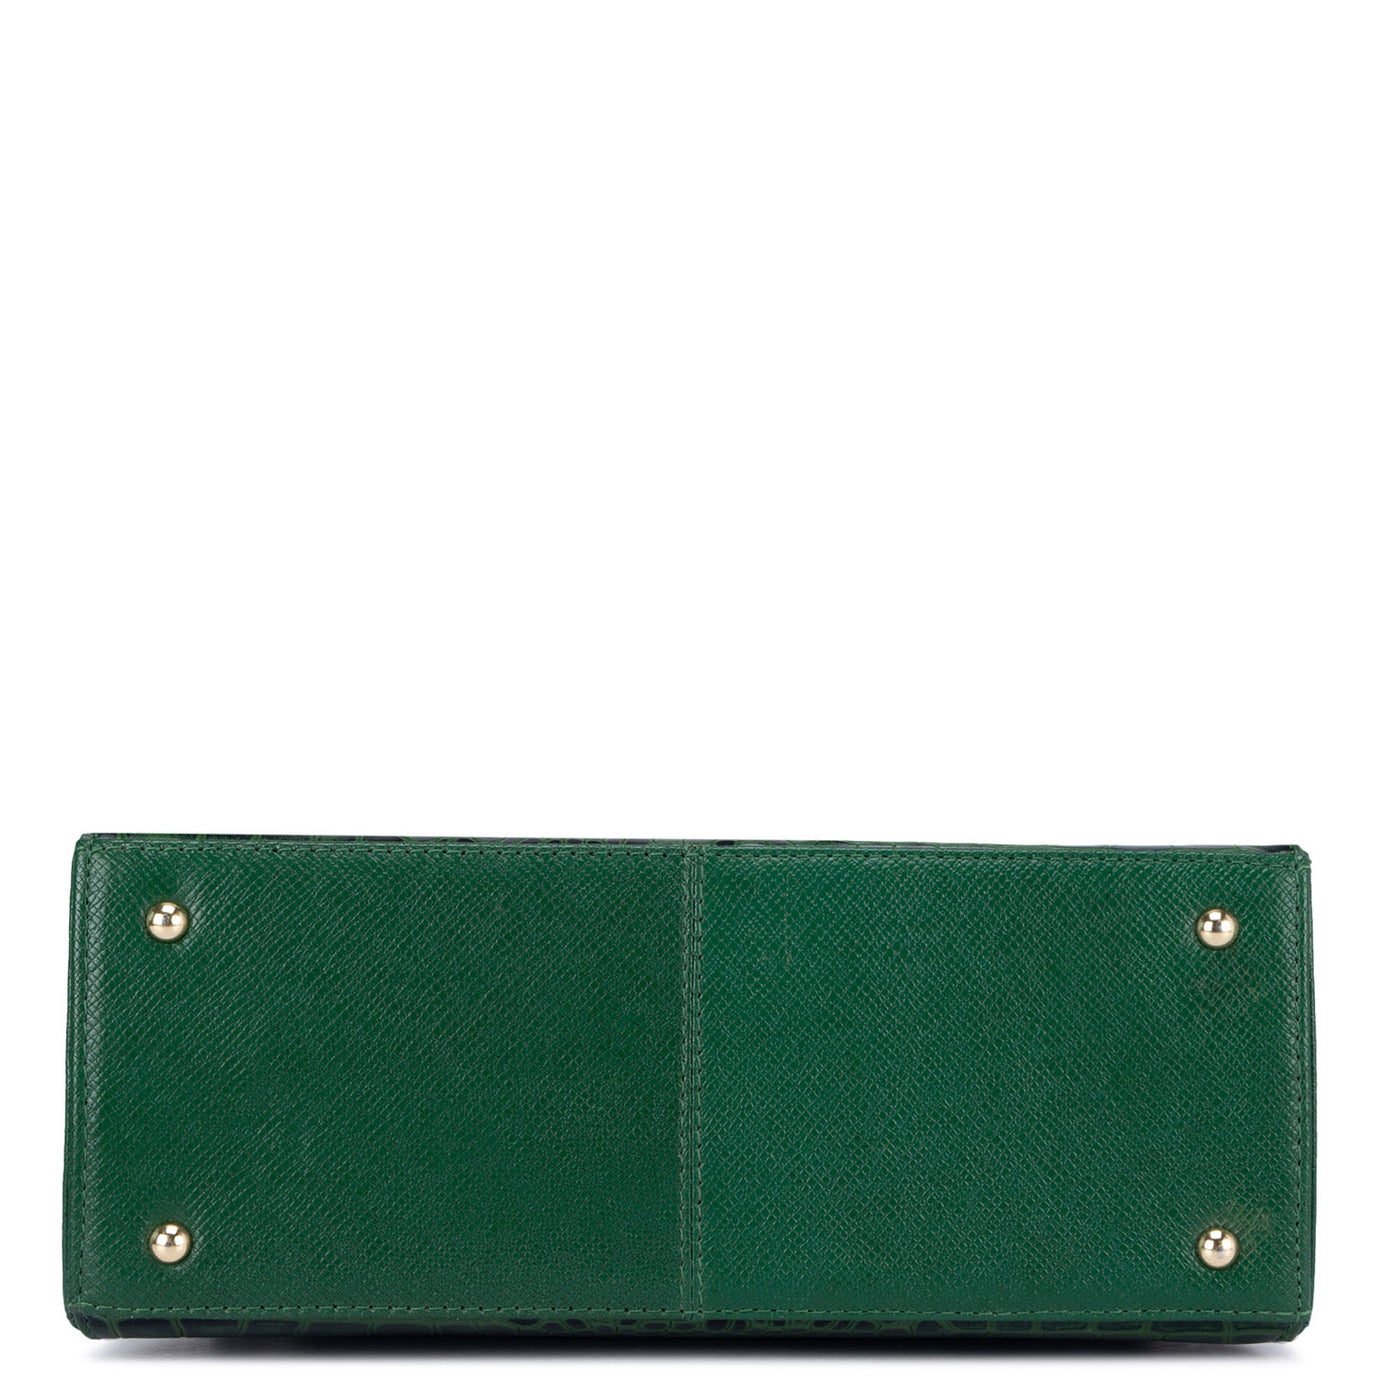 Small Croco Leather Shoulder Bag - Green